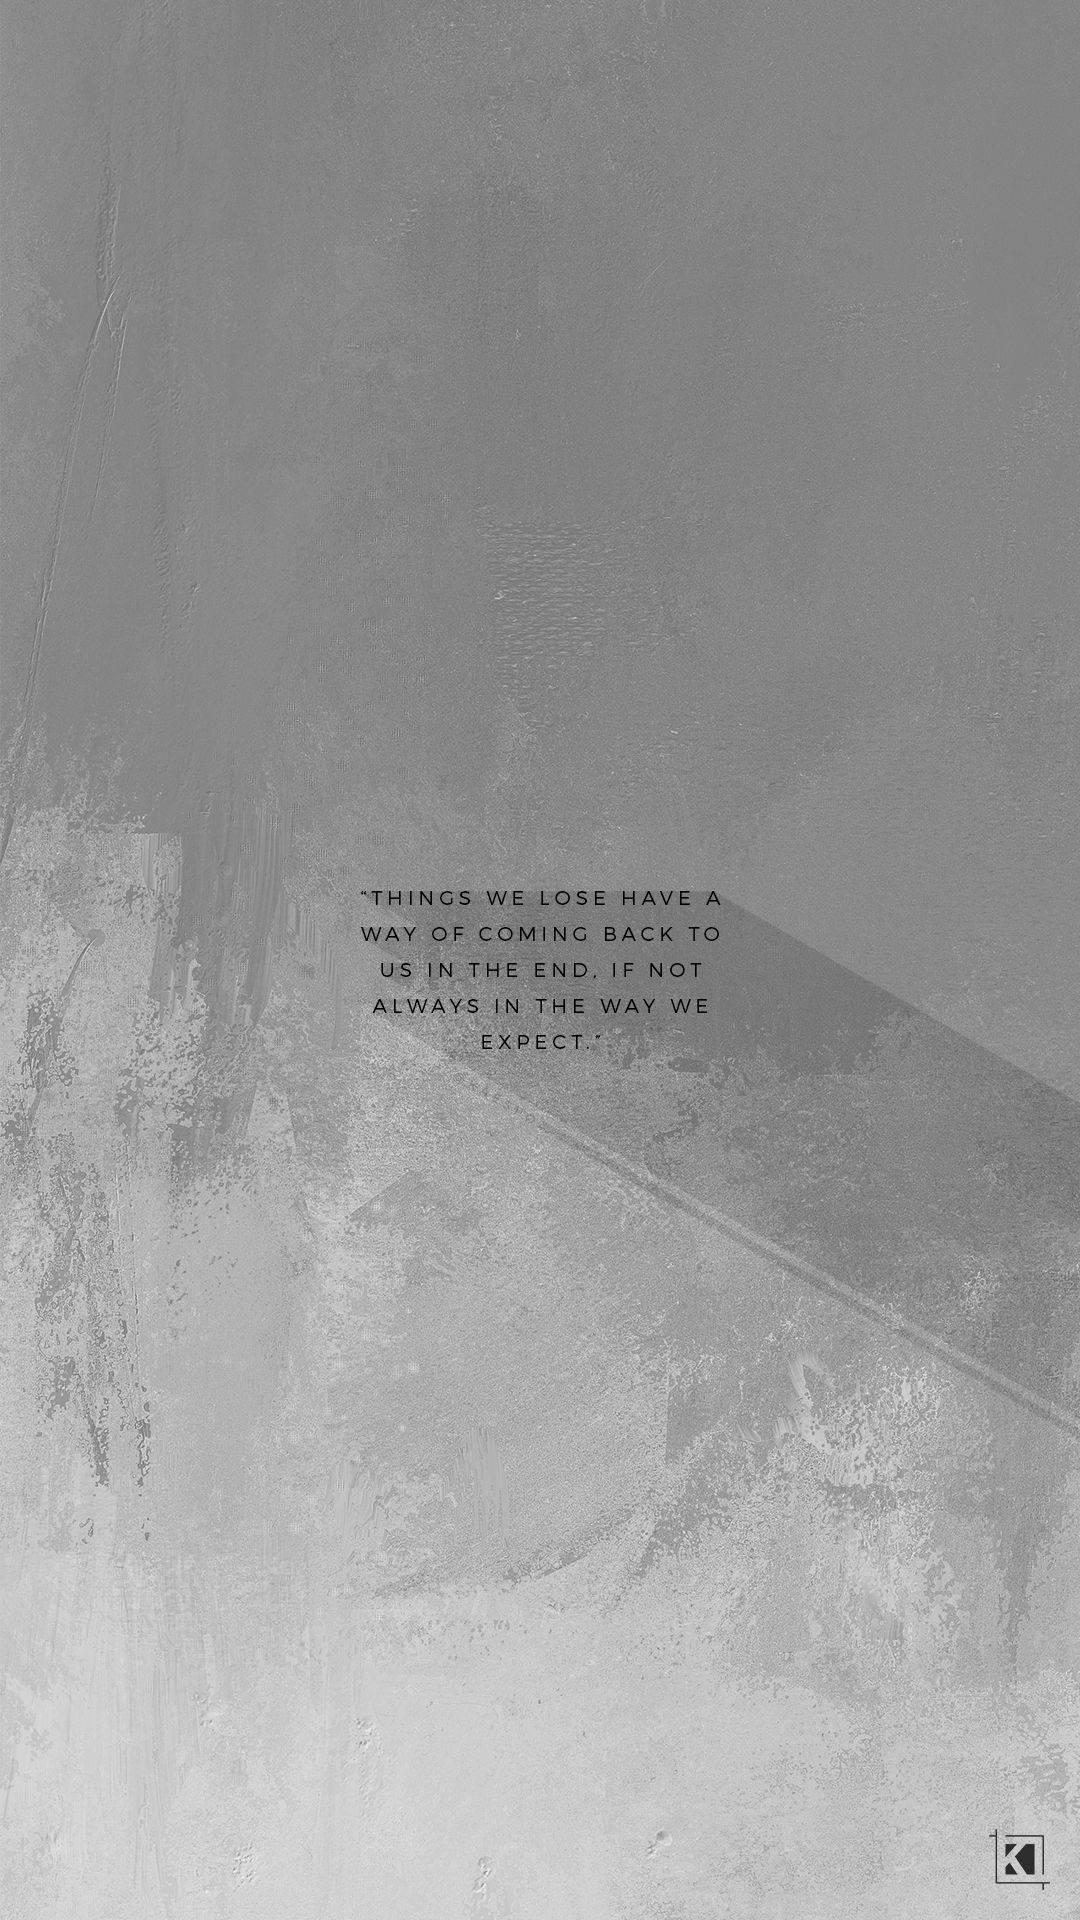 Aesthetic Gray Cement Wall With Text Wallpaper